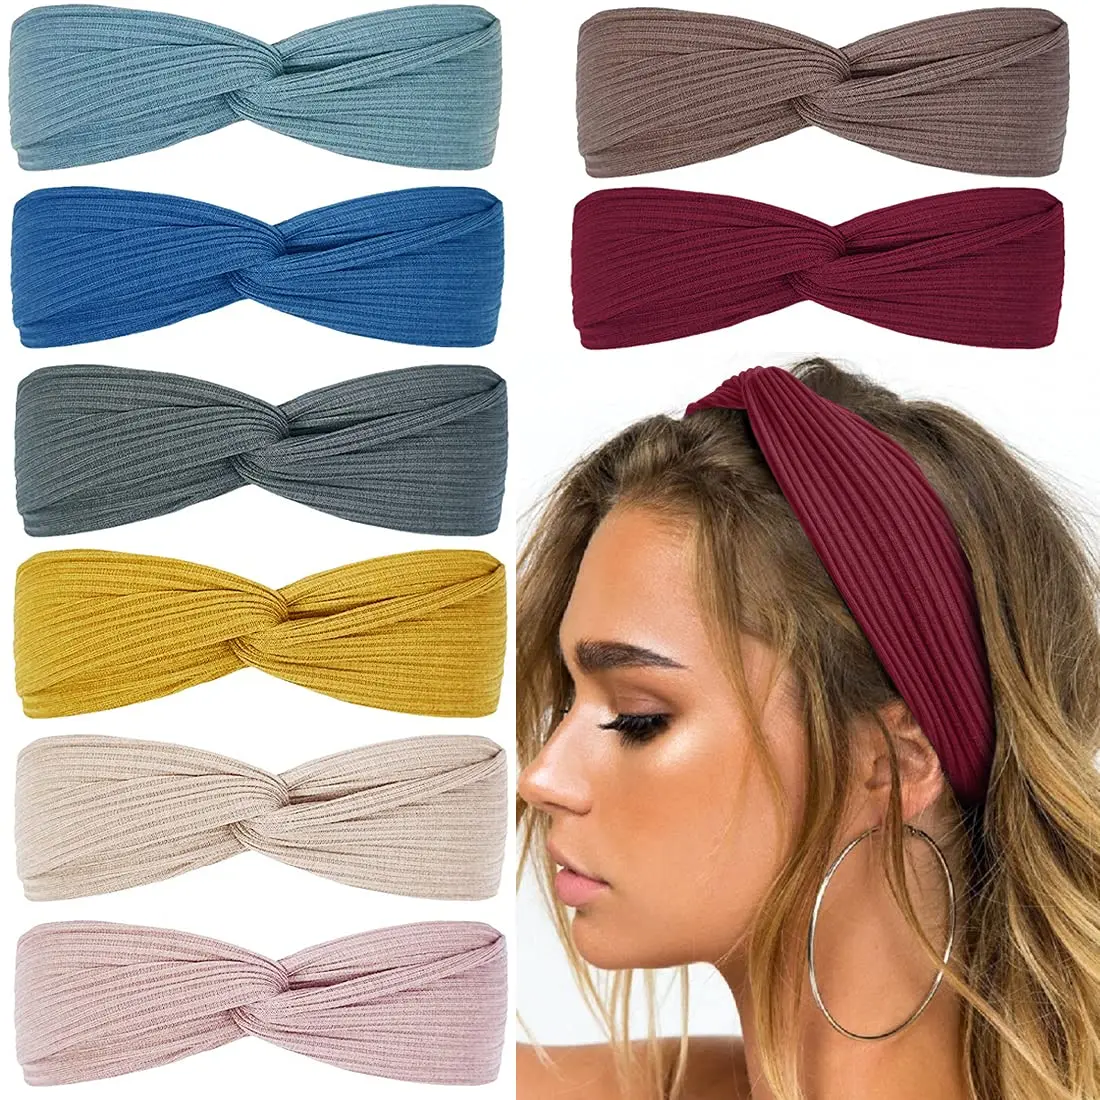 8Pcs Vintage Headbands Women Twist Knotted Boho Stretchy Hair Bands for ...